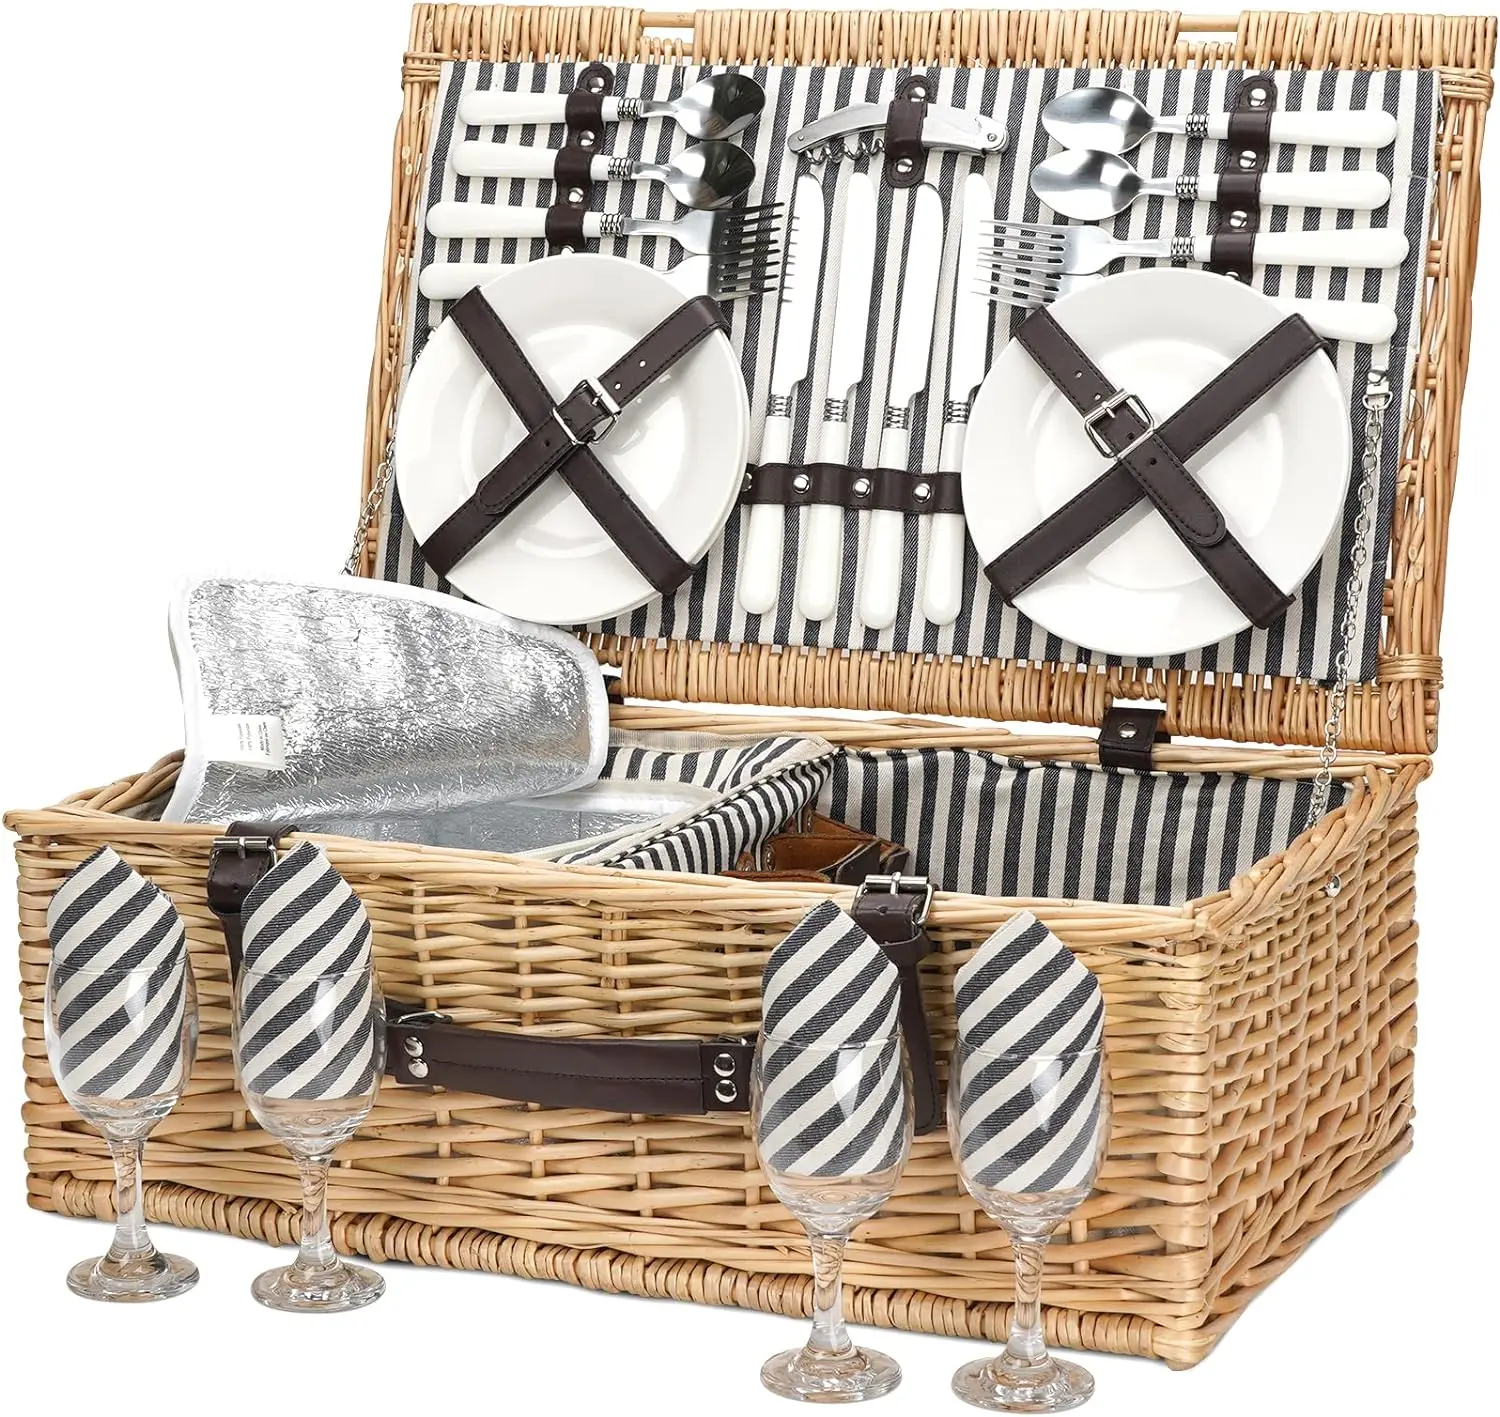 

Picnic Basket for 4 Persons with Insulated Cooler Bag, Wicker Picnic Hamper Set with Utensils Cutlery - Perfect for Picnicking,